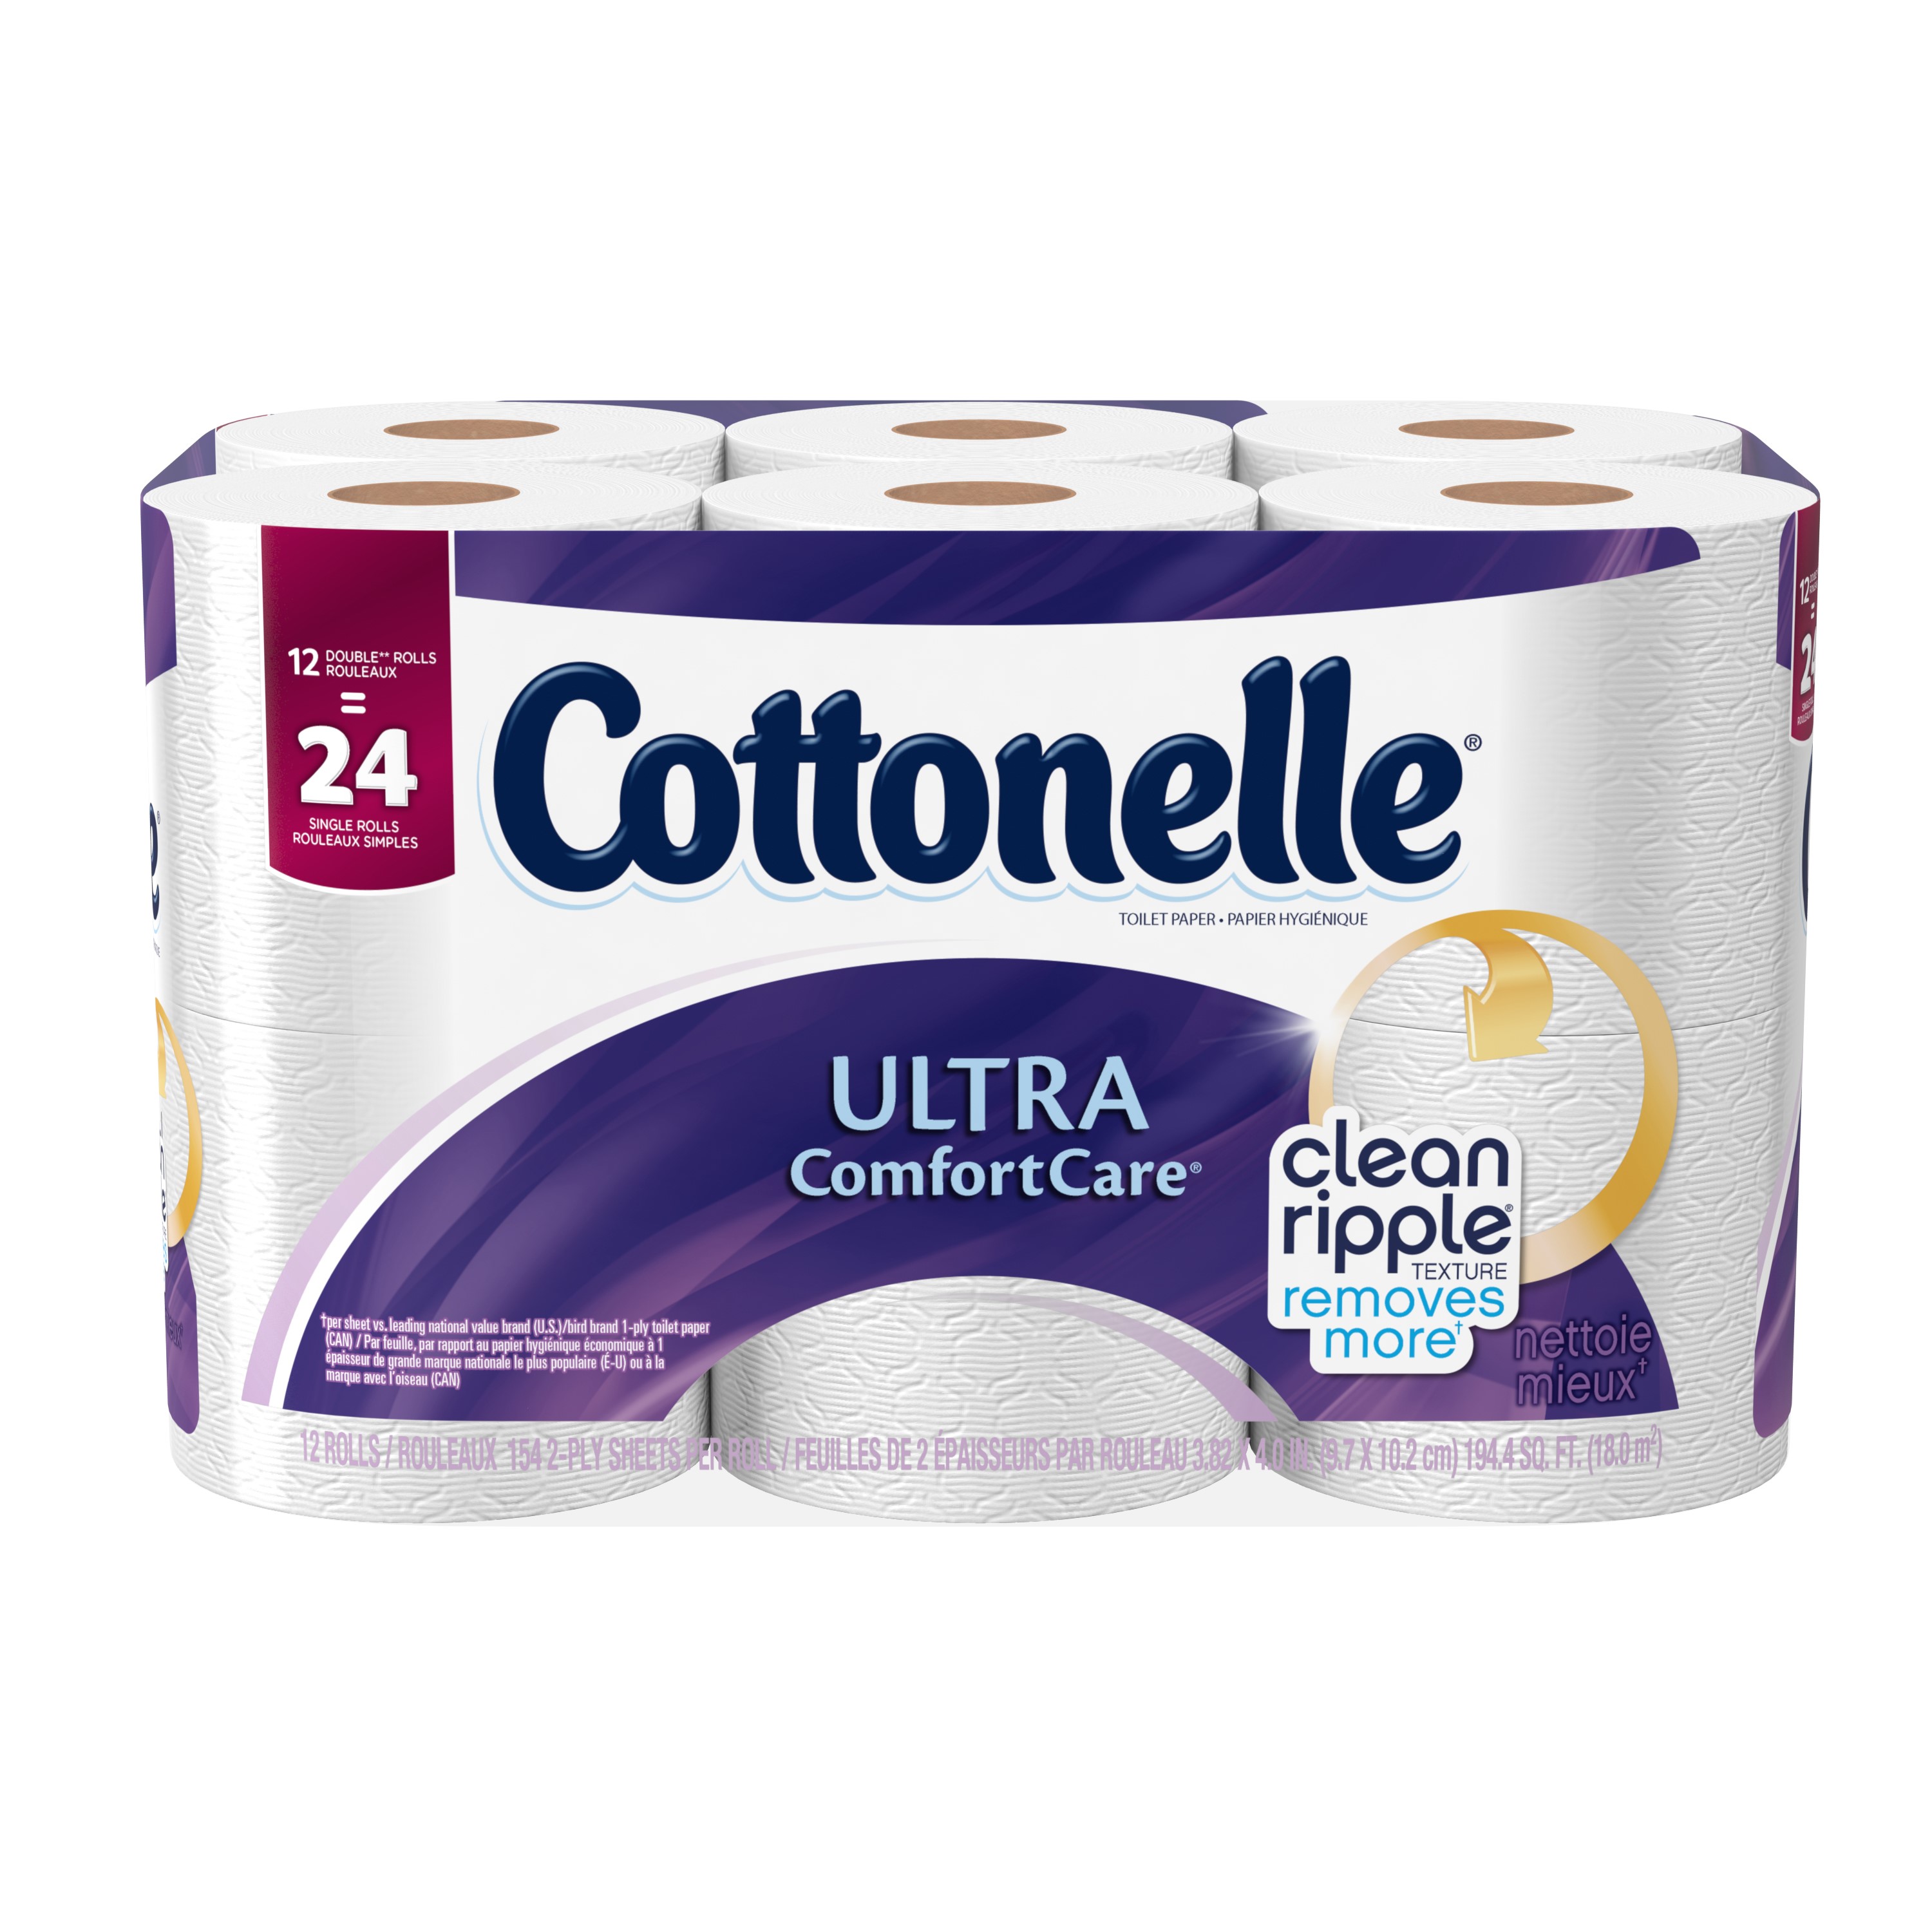 Cottonelle Ultra Comfort Toilet Paper, 12 Double Rolls, 154 Sheets per Roll (1,848 Total) - image 1 of 9